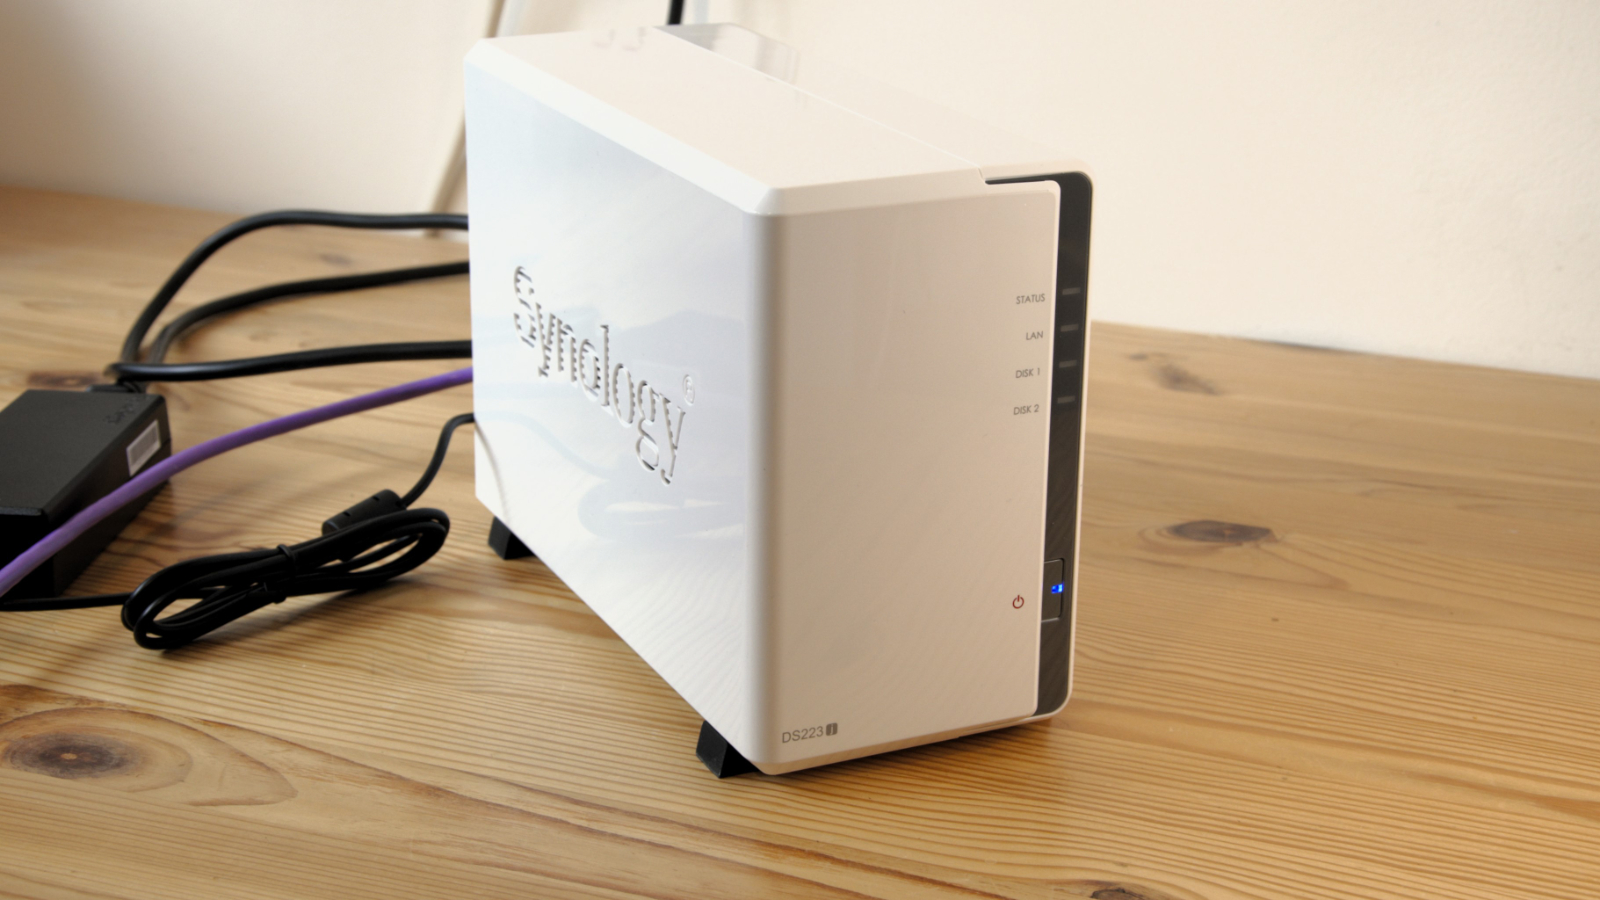 Synology DiskStation DS223j front view